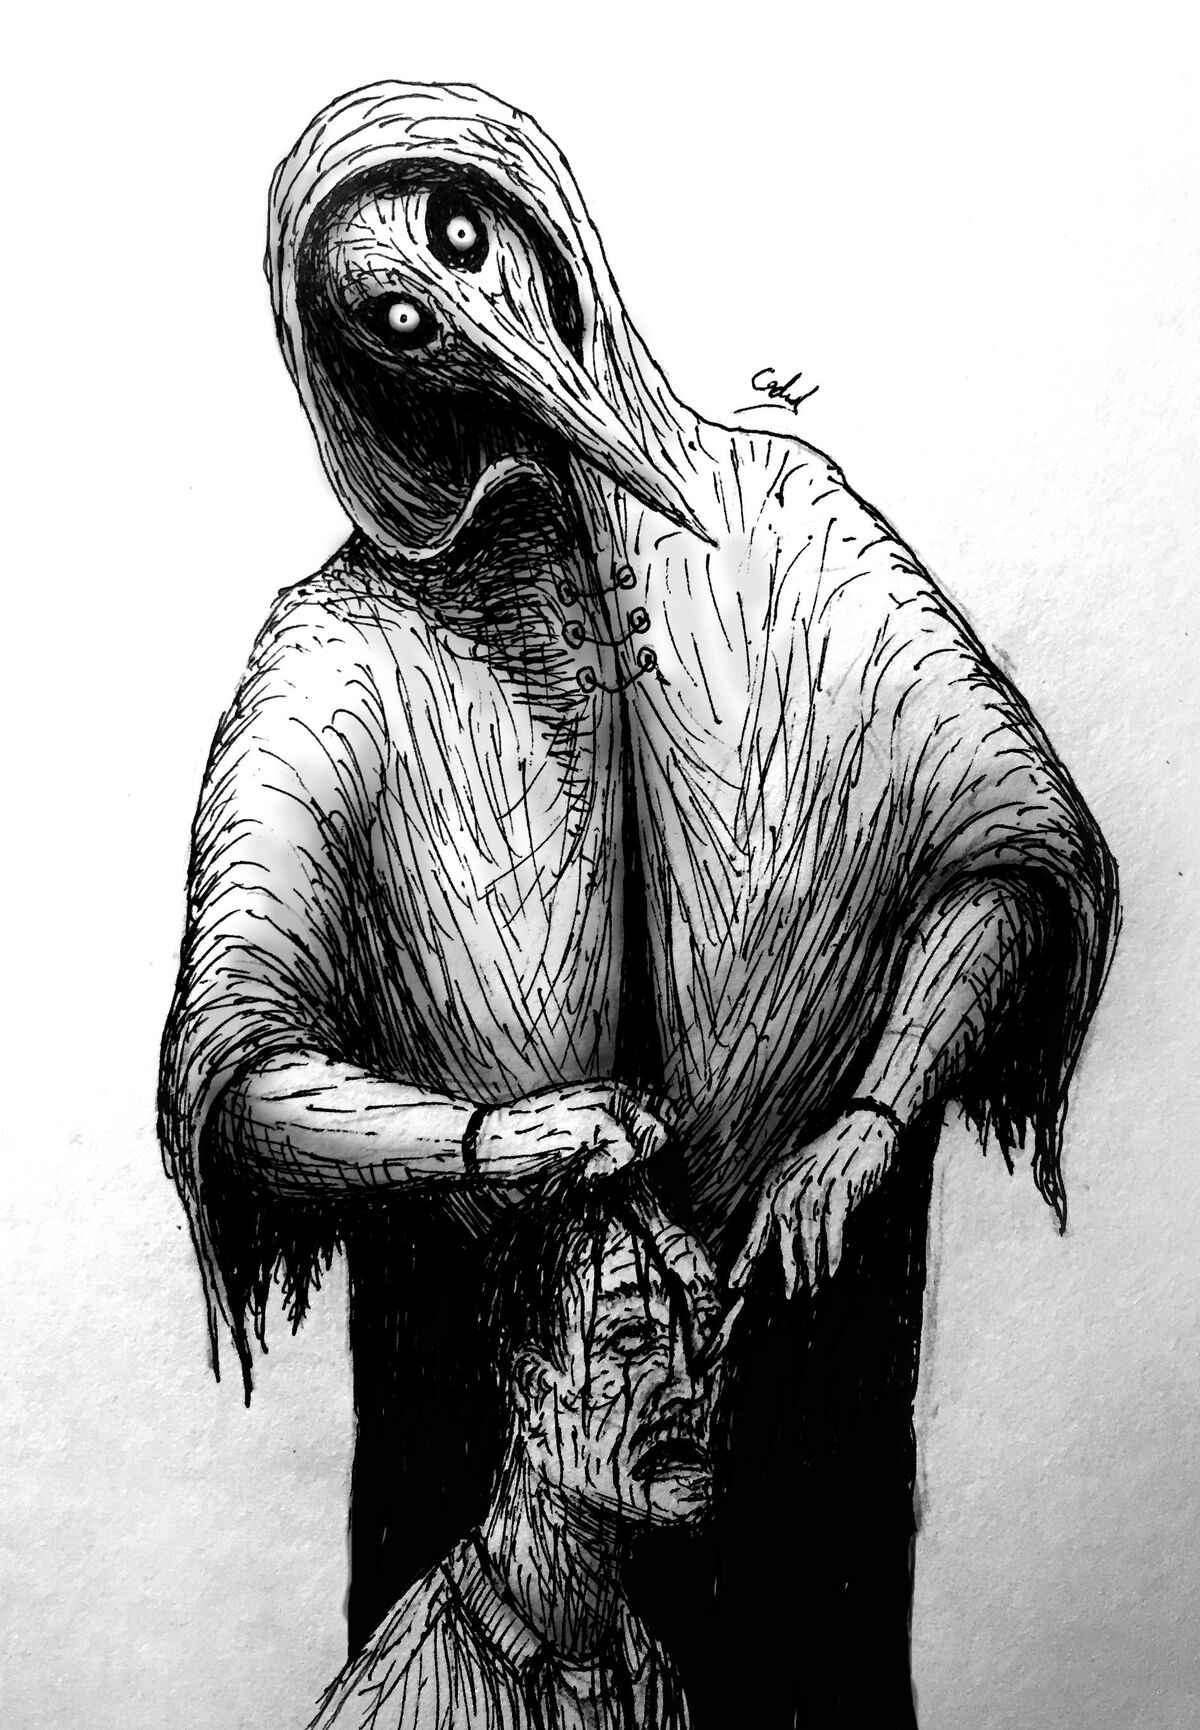 SCP-049: Plague Doctor - The SCP Files (podcast)